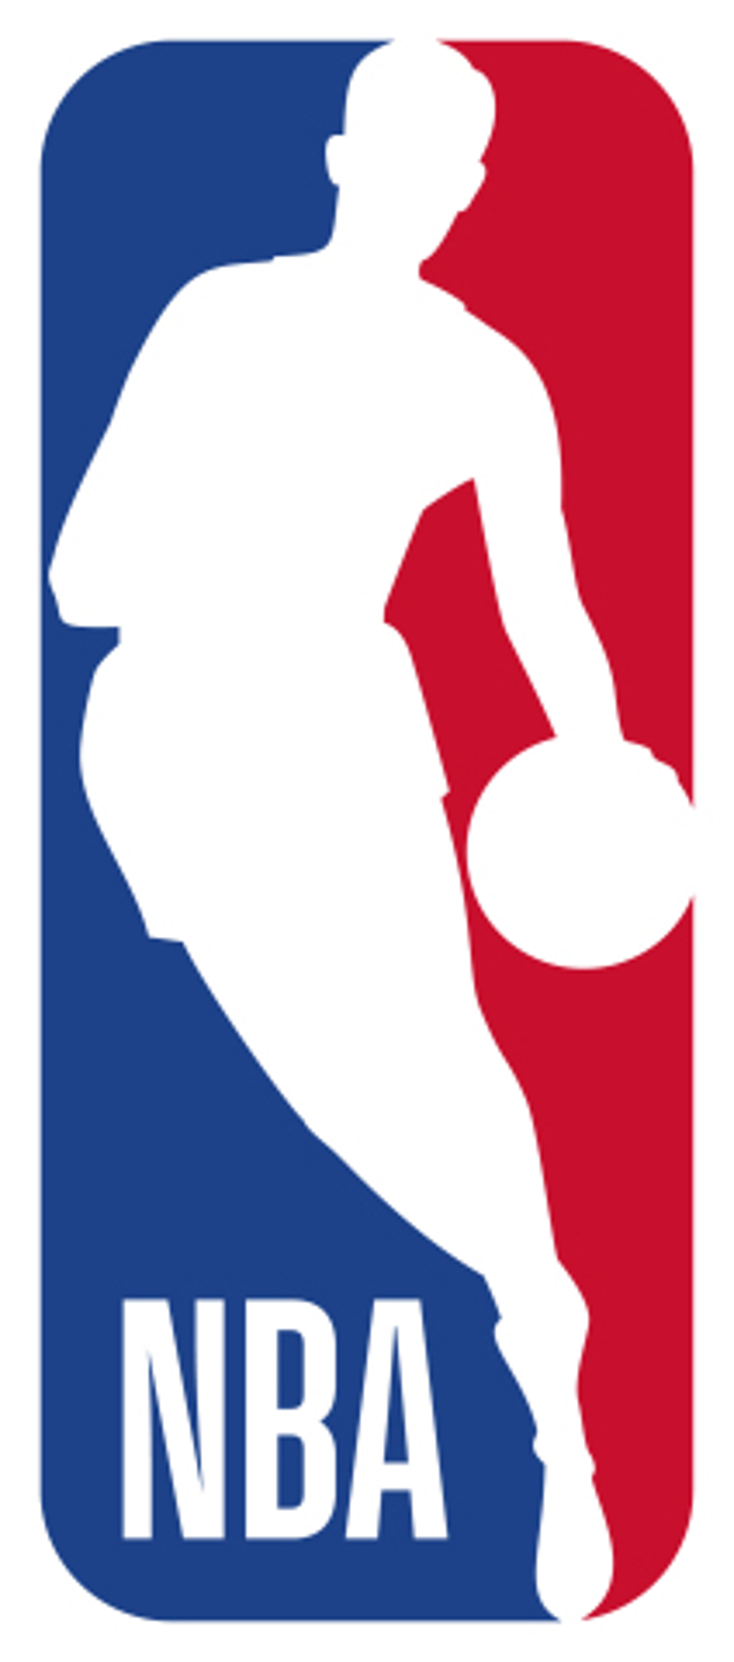 NBA Teams for Online Stores in APAC